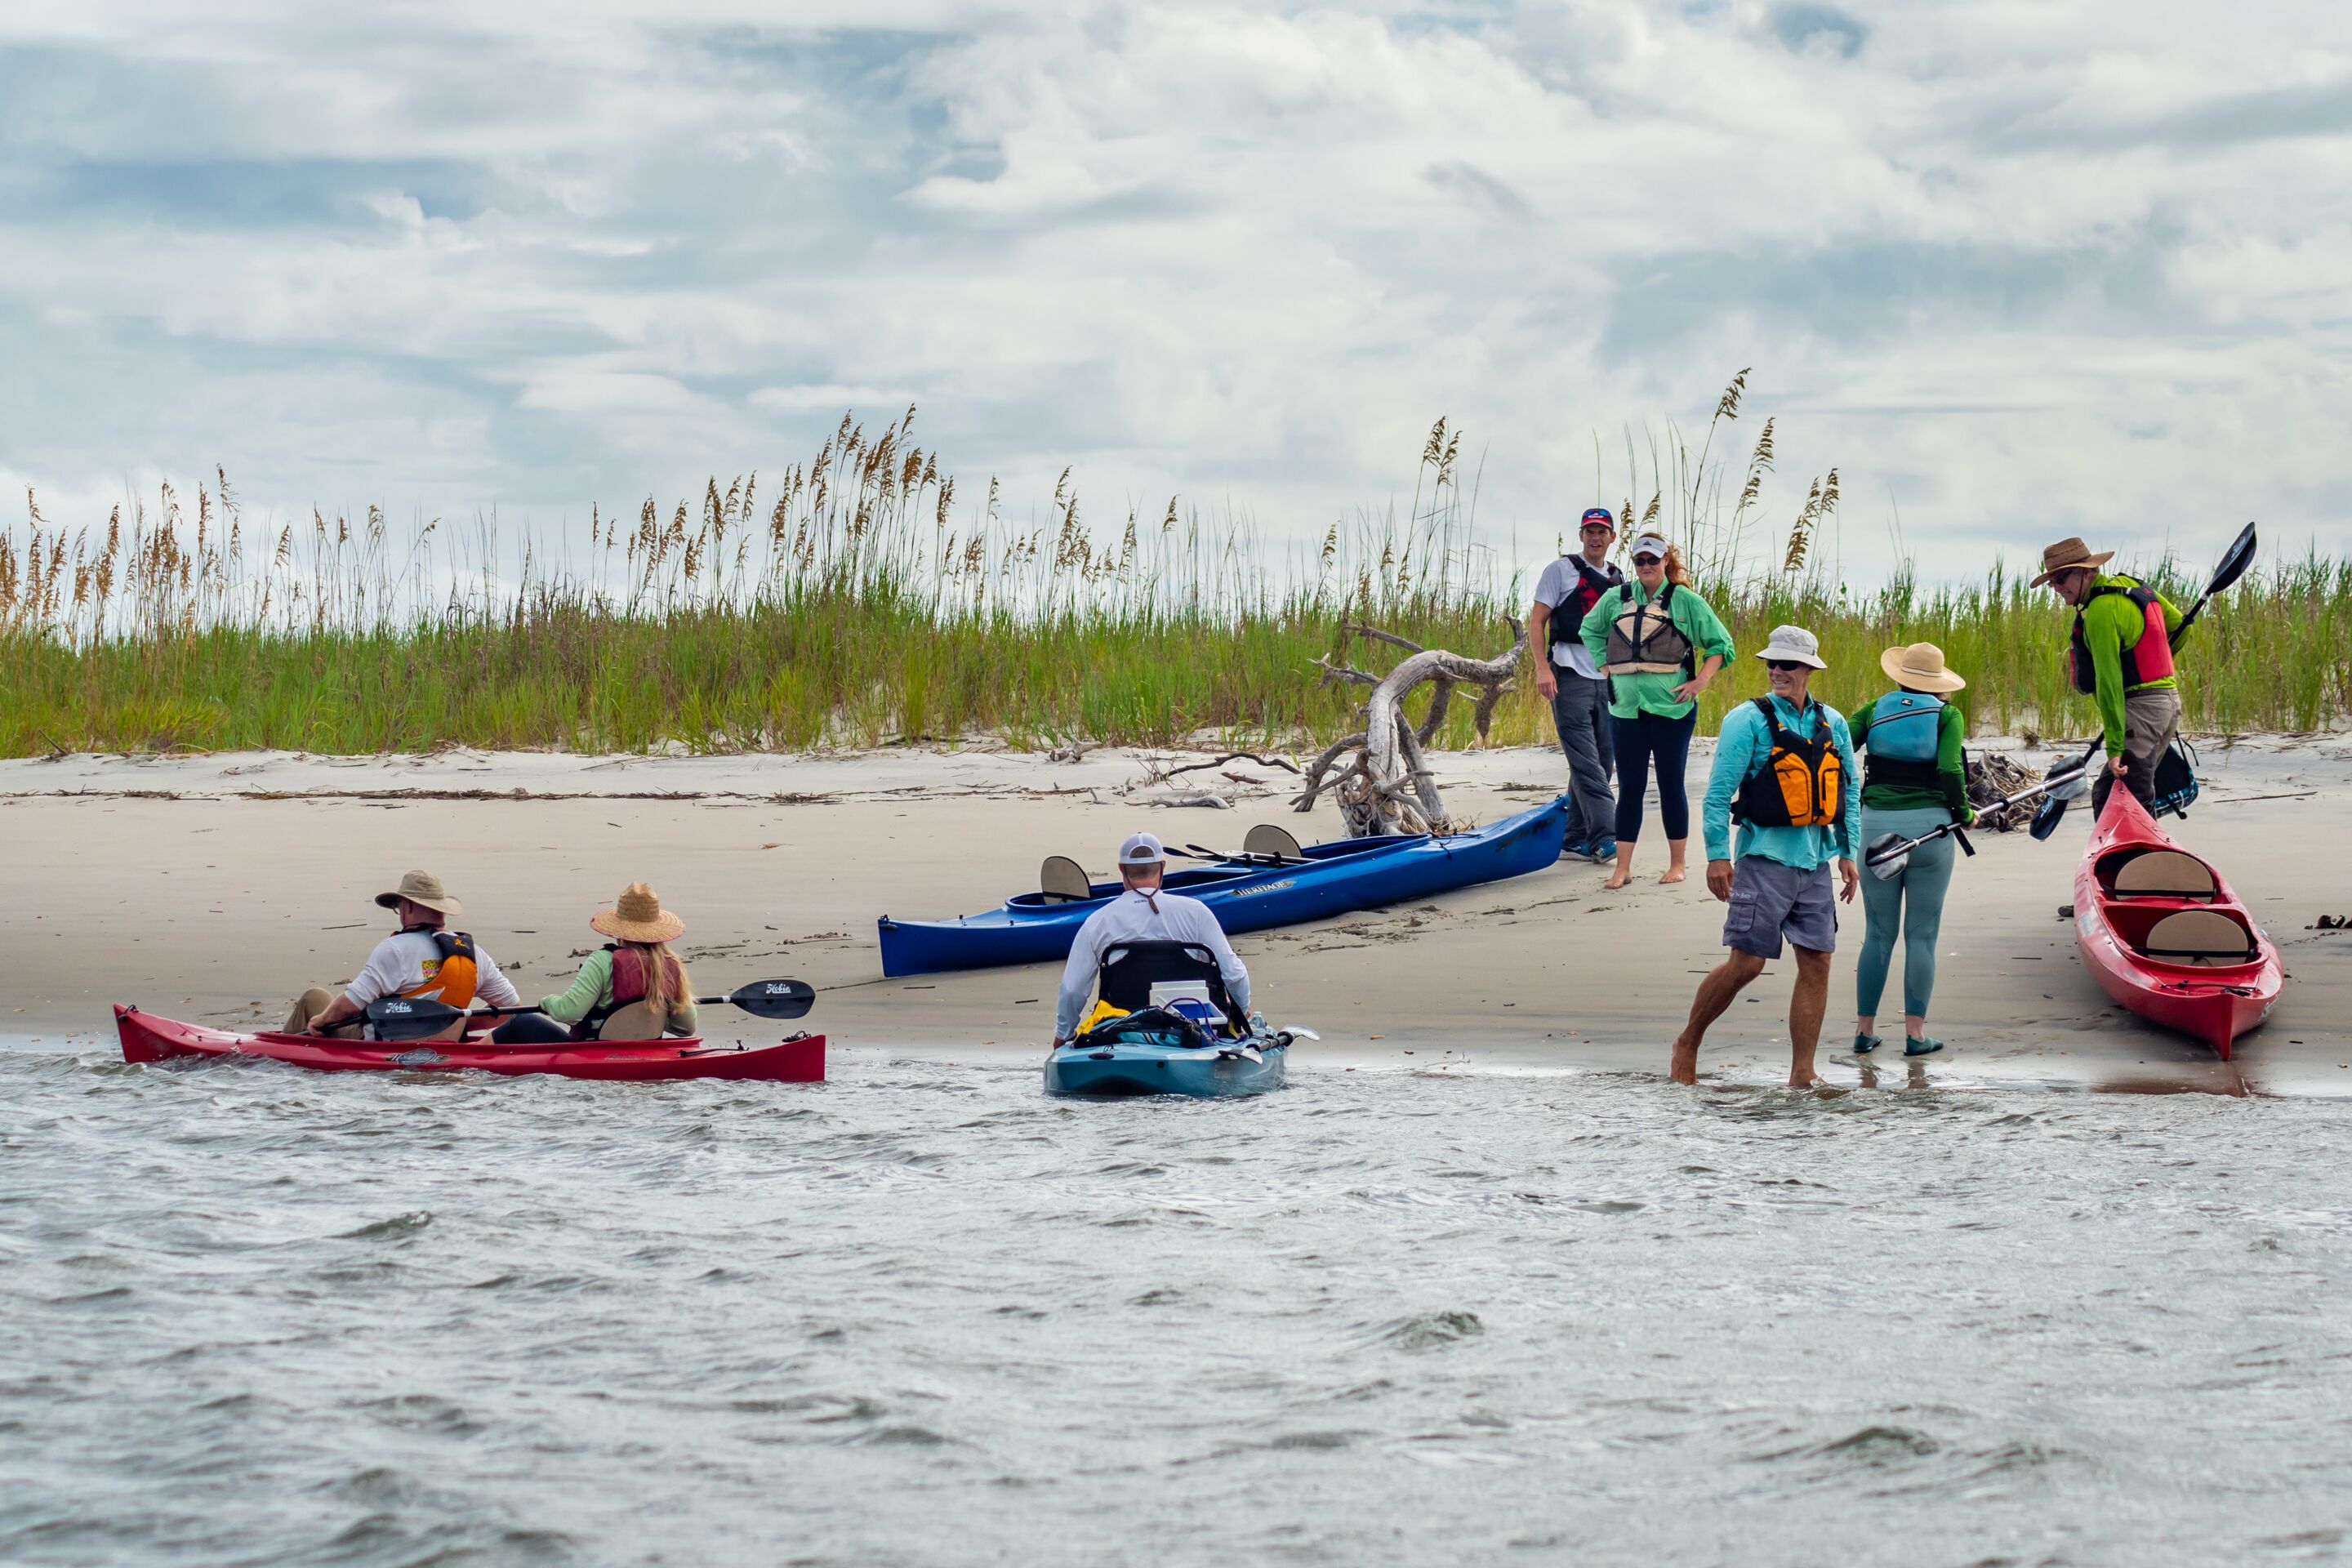 Reserve and Surf the Earth lead a naturalist-guided tour through of North Inlet estuary. The trip includes all equipment and instruction in basic kayaking, a natural history overview, and educational and research highlights of the North Inlet ecosystem.